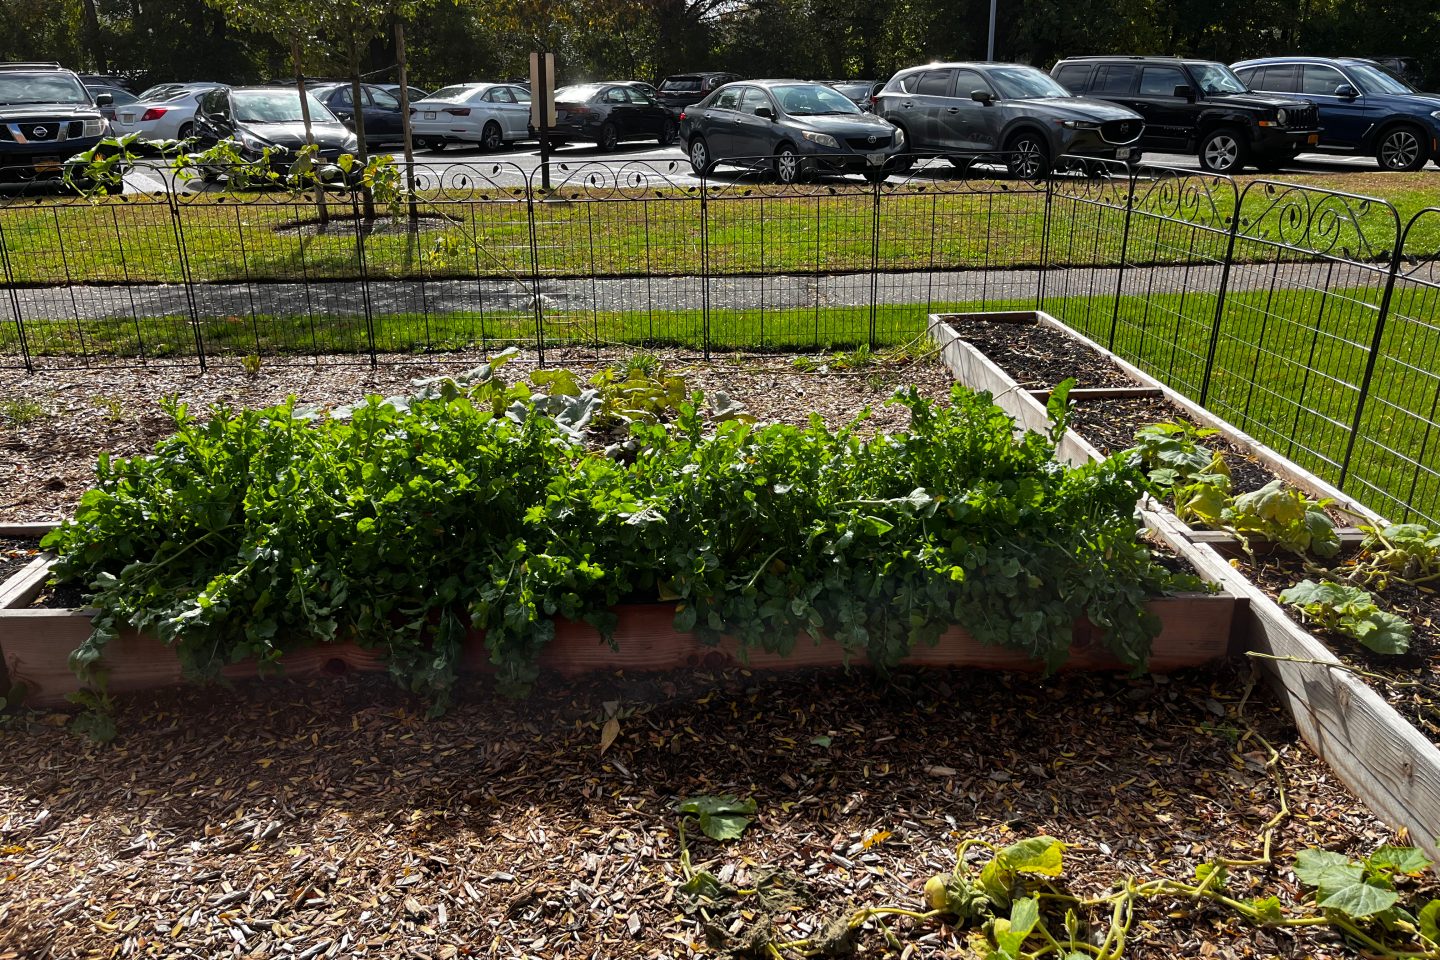 A view of the lush green vegetables growing in the Adelphi University community garden beds.